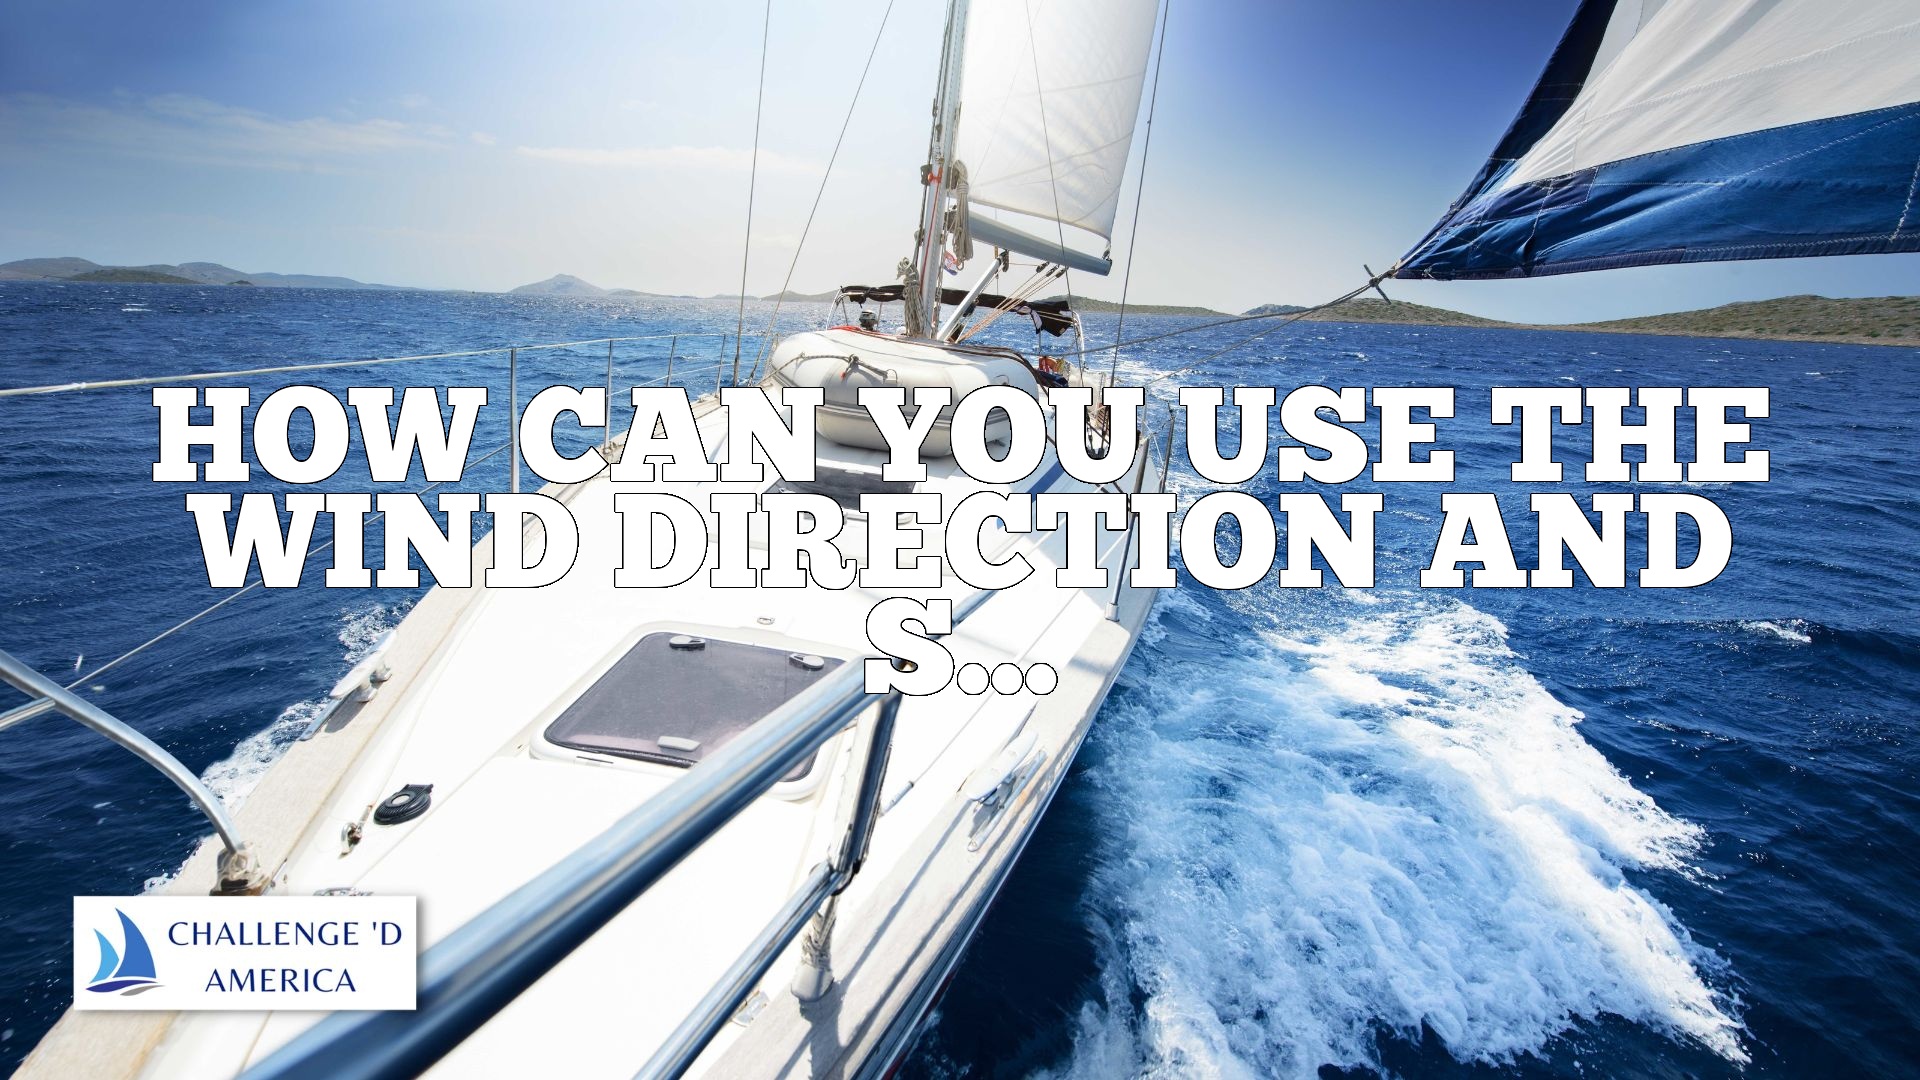 How Can You Use The Wind Direction And Speed To Your Advantage While Sailing?